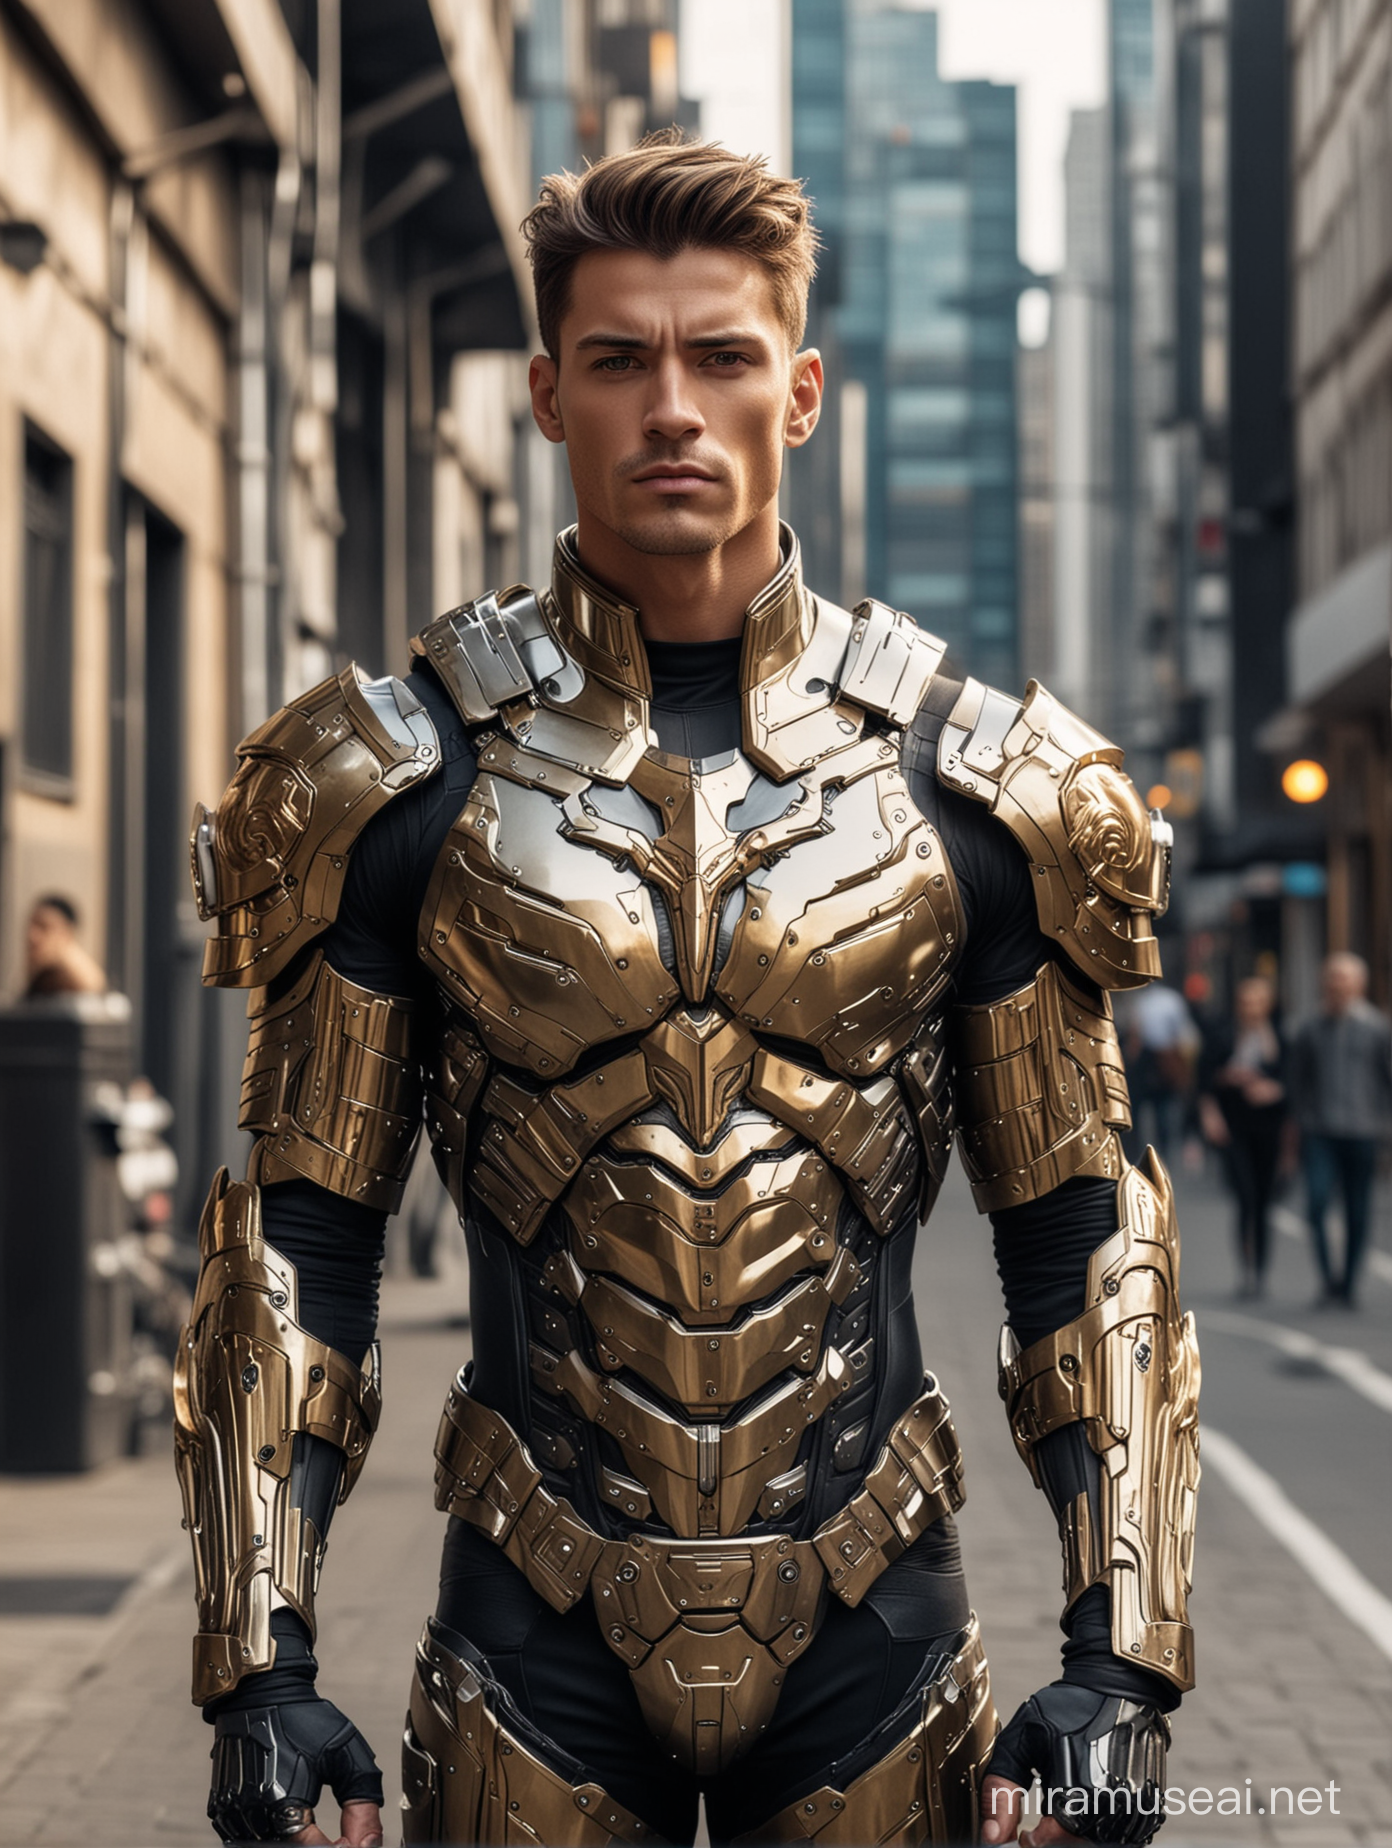 Tall and handsome muscular men with beautiful hairstyle with attractive eyes and Big wide shoulder and chest in sci-fi High Tech golden, silver and black armour suit standing with firearms walking on street 